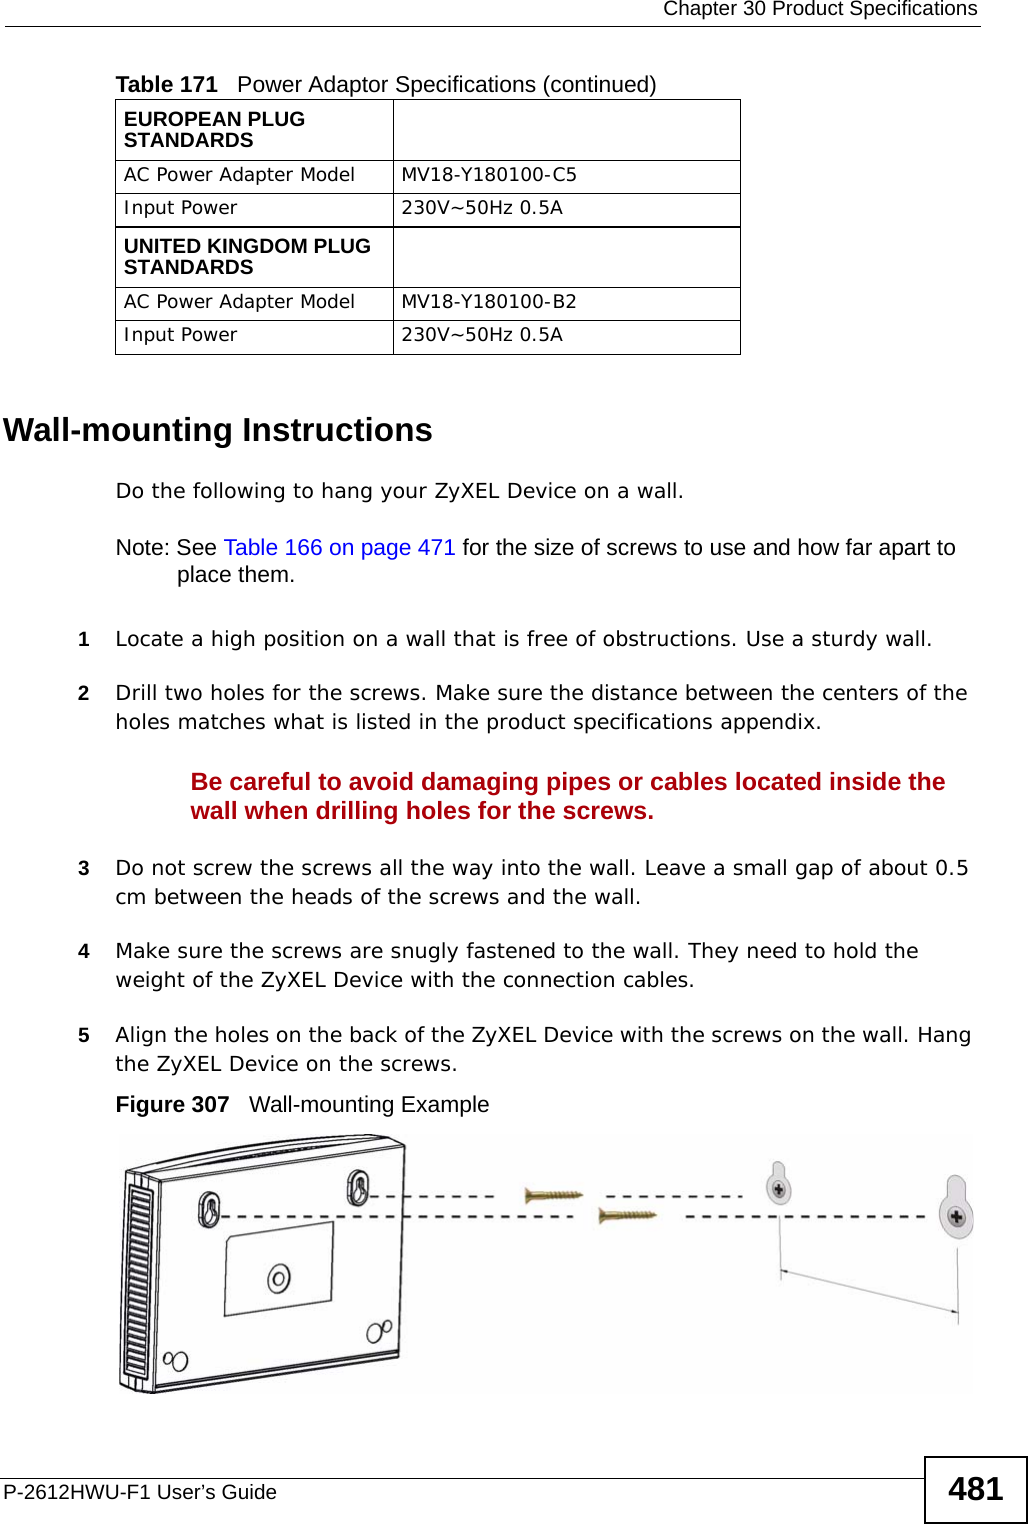  Chapter 30 Product SpecificationsP-2612HWU-F1 User’s Guide 481Wall-mounting InstructionsDo the following to hang your ZyXEL Device on a wall.Note: See Table 166 on page 471 for the size of screws to use and how far apart to place them.1Locate a high position on a wall that is free of obstructions. Use a sturdy wall.2Drill two holes for the screws. Make sure the distance between the centers of the holes matches what is listed in the product specifications appendix.Be careful to avoid damaging pipes or cables located inside the wall when drilling holes for the screws.3Do not screw the screws all the way into the wall. Leave a small gap of about 0.5 cm between the heads of the screws and the wall. 4Make sure the screws are snugly fastened to the wall. They need to hold the weight of the ZyXEL Device with the connection cables. 5Align the holes on the back of the ZyXEL Device with the screws on the wall. Hang the ZyXEL Device on the screws.Figure 307   Wall-mounting ExampleEUROPEAN PLUG STANDARDSAC Power Adapter Model MV18-Y180100-C5Input Power 230V~50Hz 0.5AUNITED KINGDOM PLUG STANDARDSAC Power Adapter Model MV18-Y180100-B2Input Power 230V~50Hz 0.5ATable 171   Power Adaptor Specifications (continued)